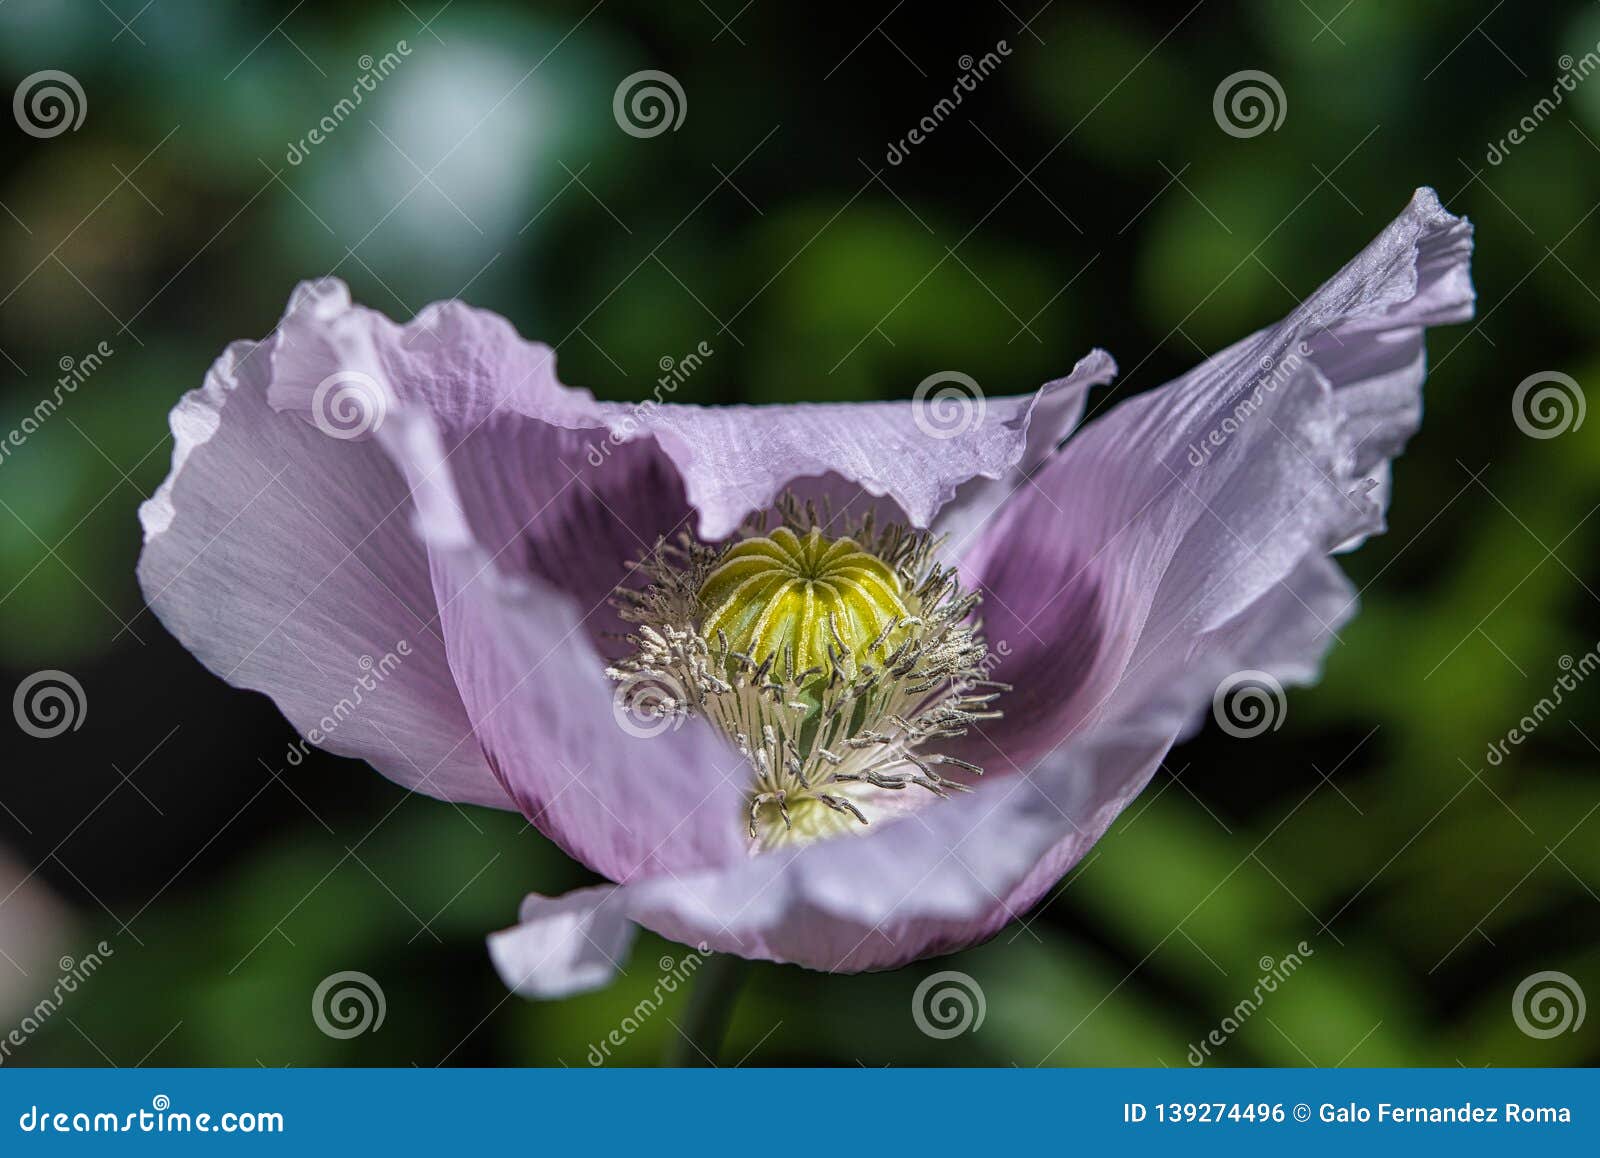 idylic lilac and purple breadseed poppy flower in the wind on a green spring garden.